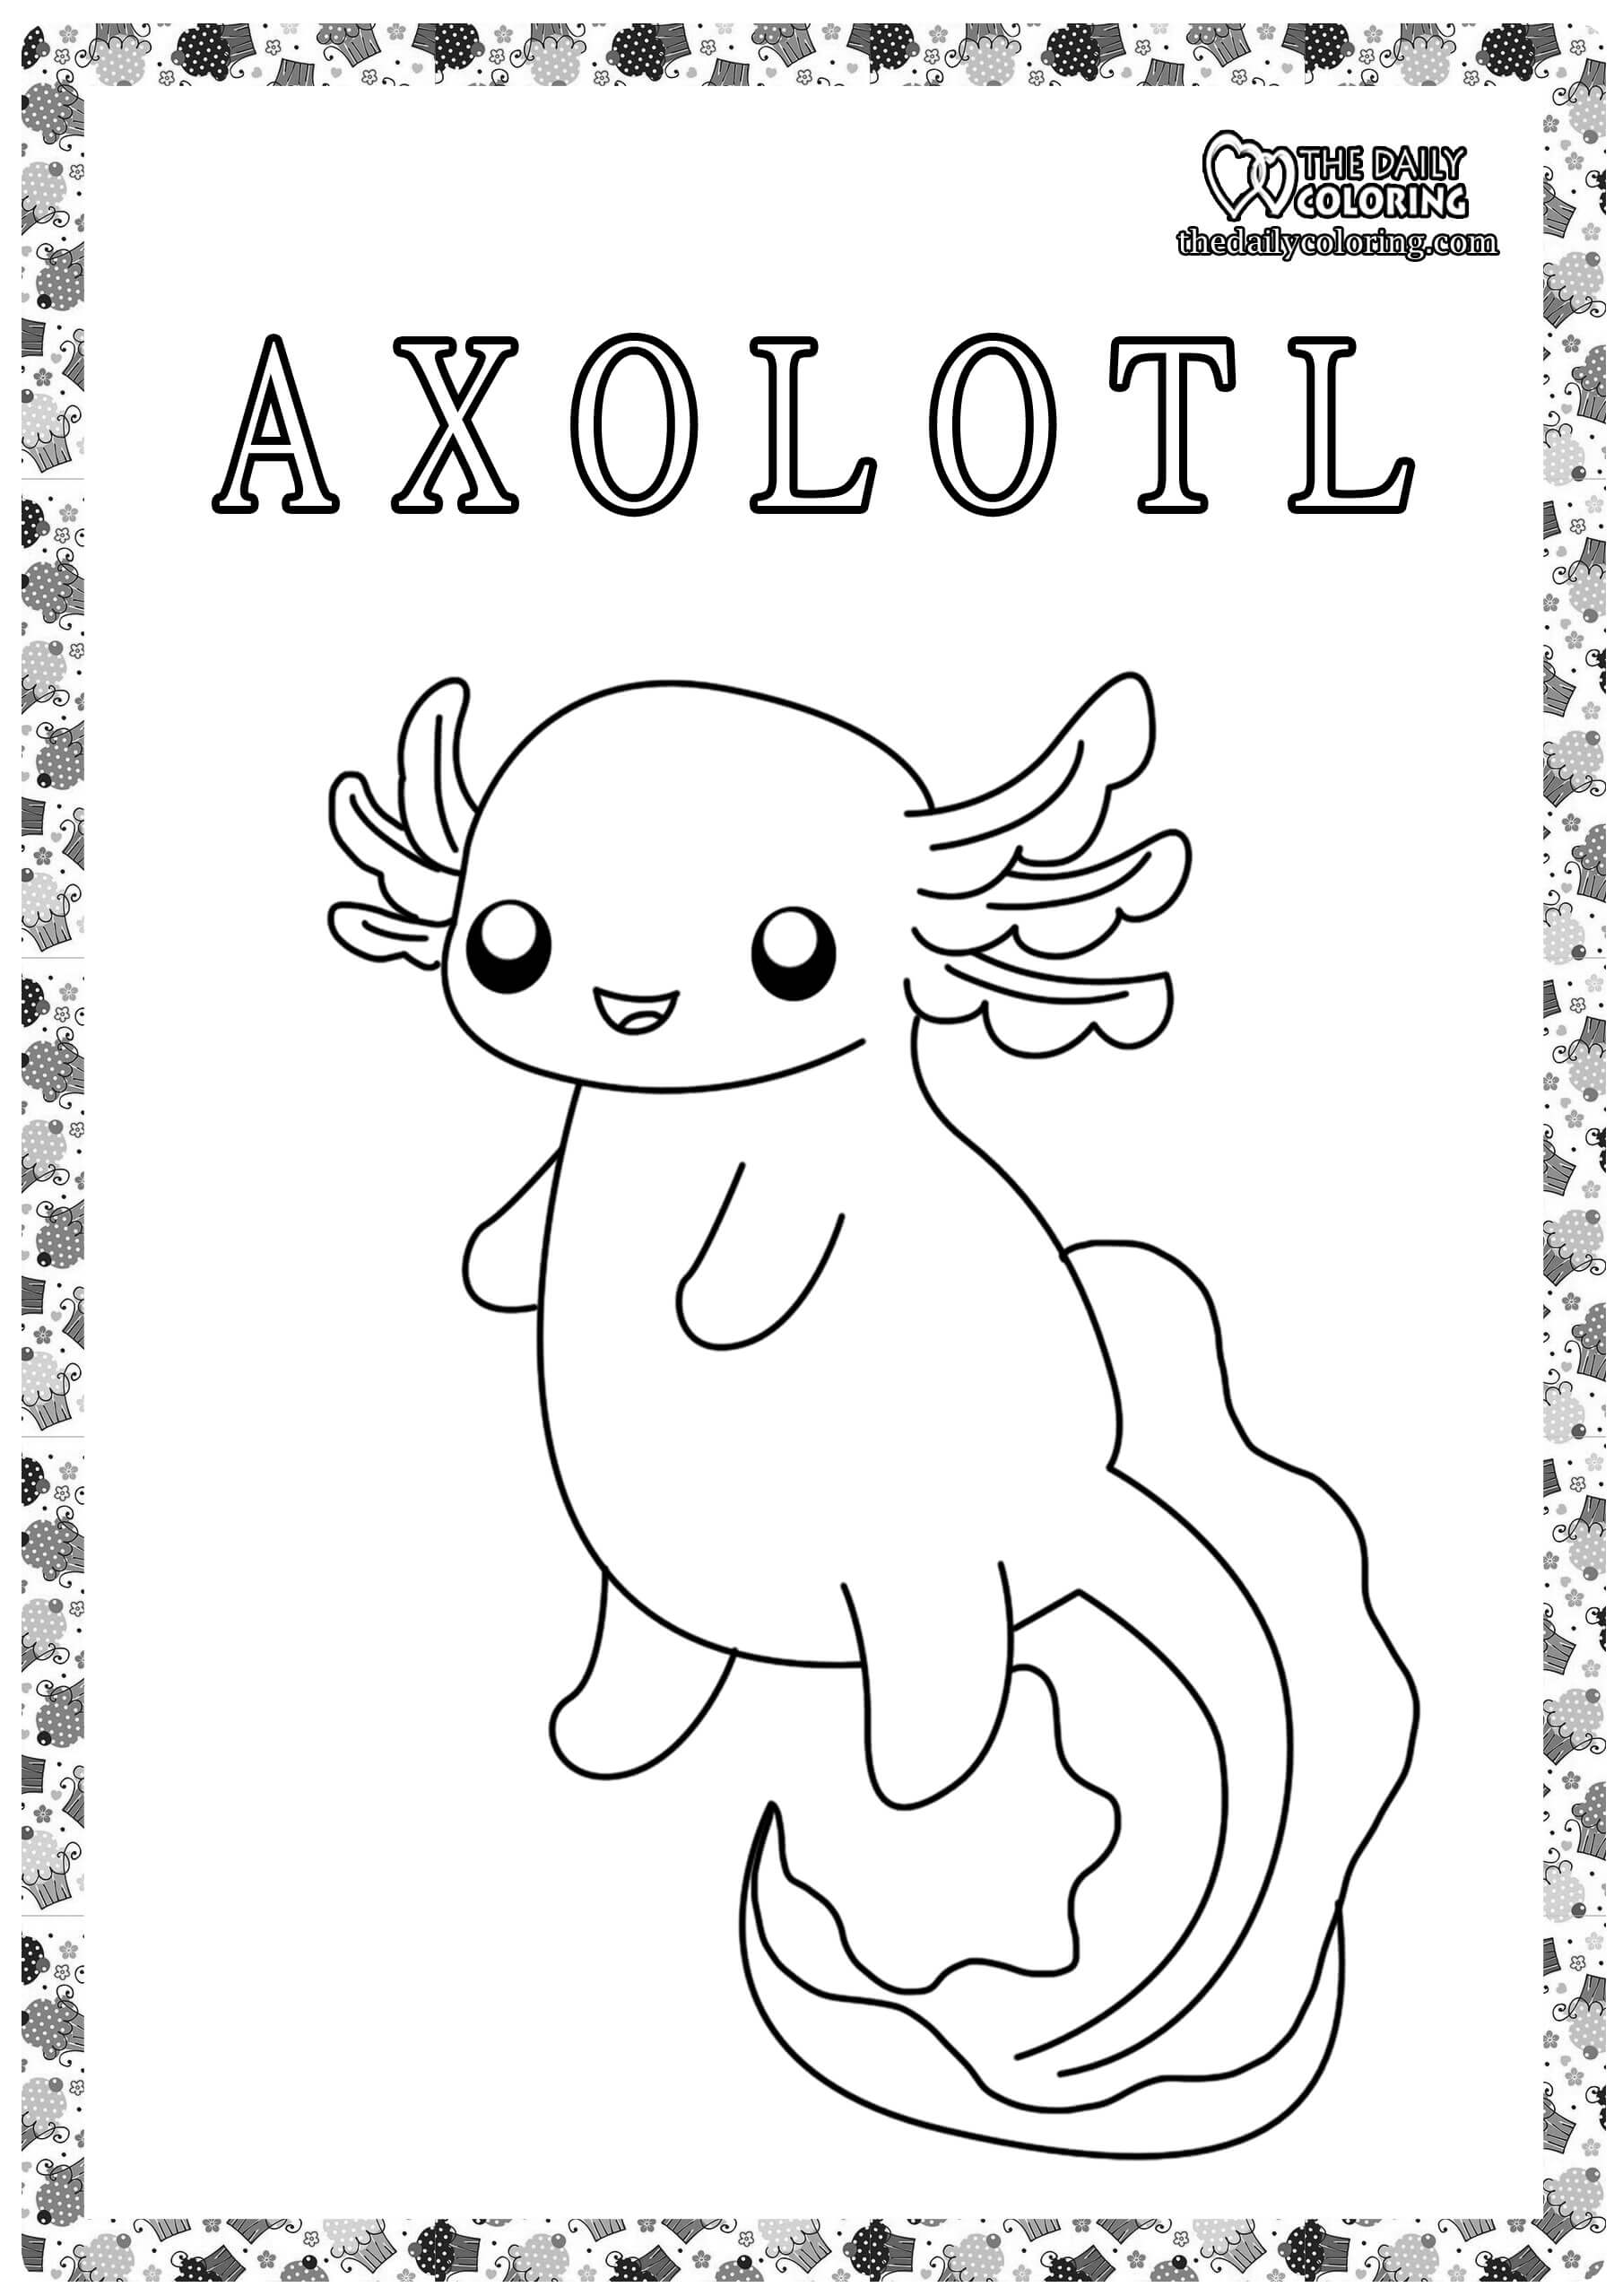 Axolotl Coloring Pages   The Daily Coloring